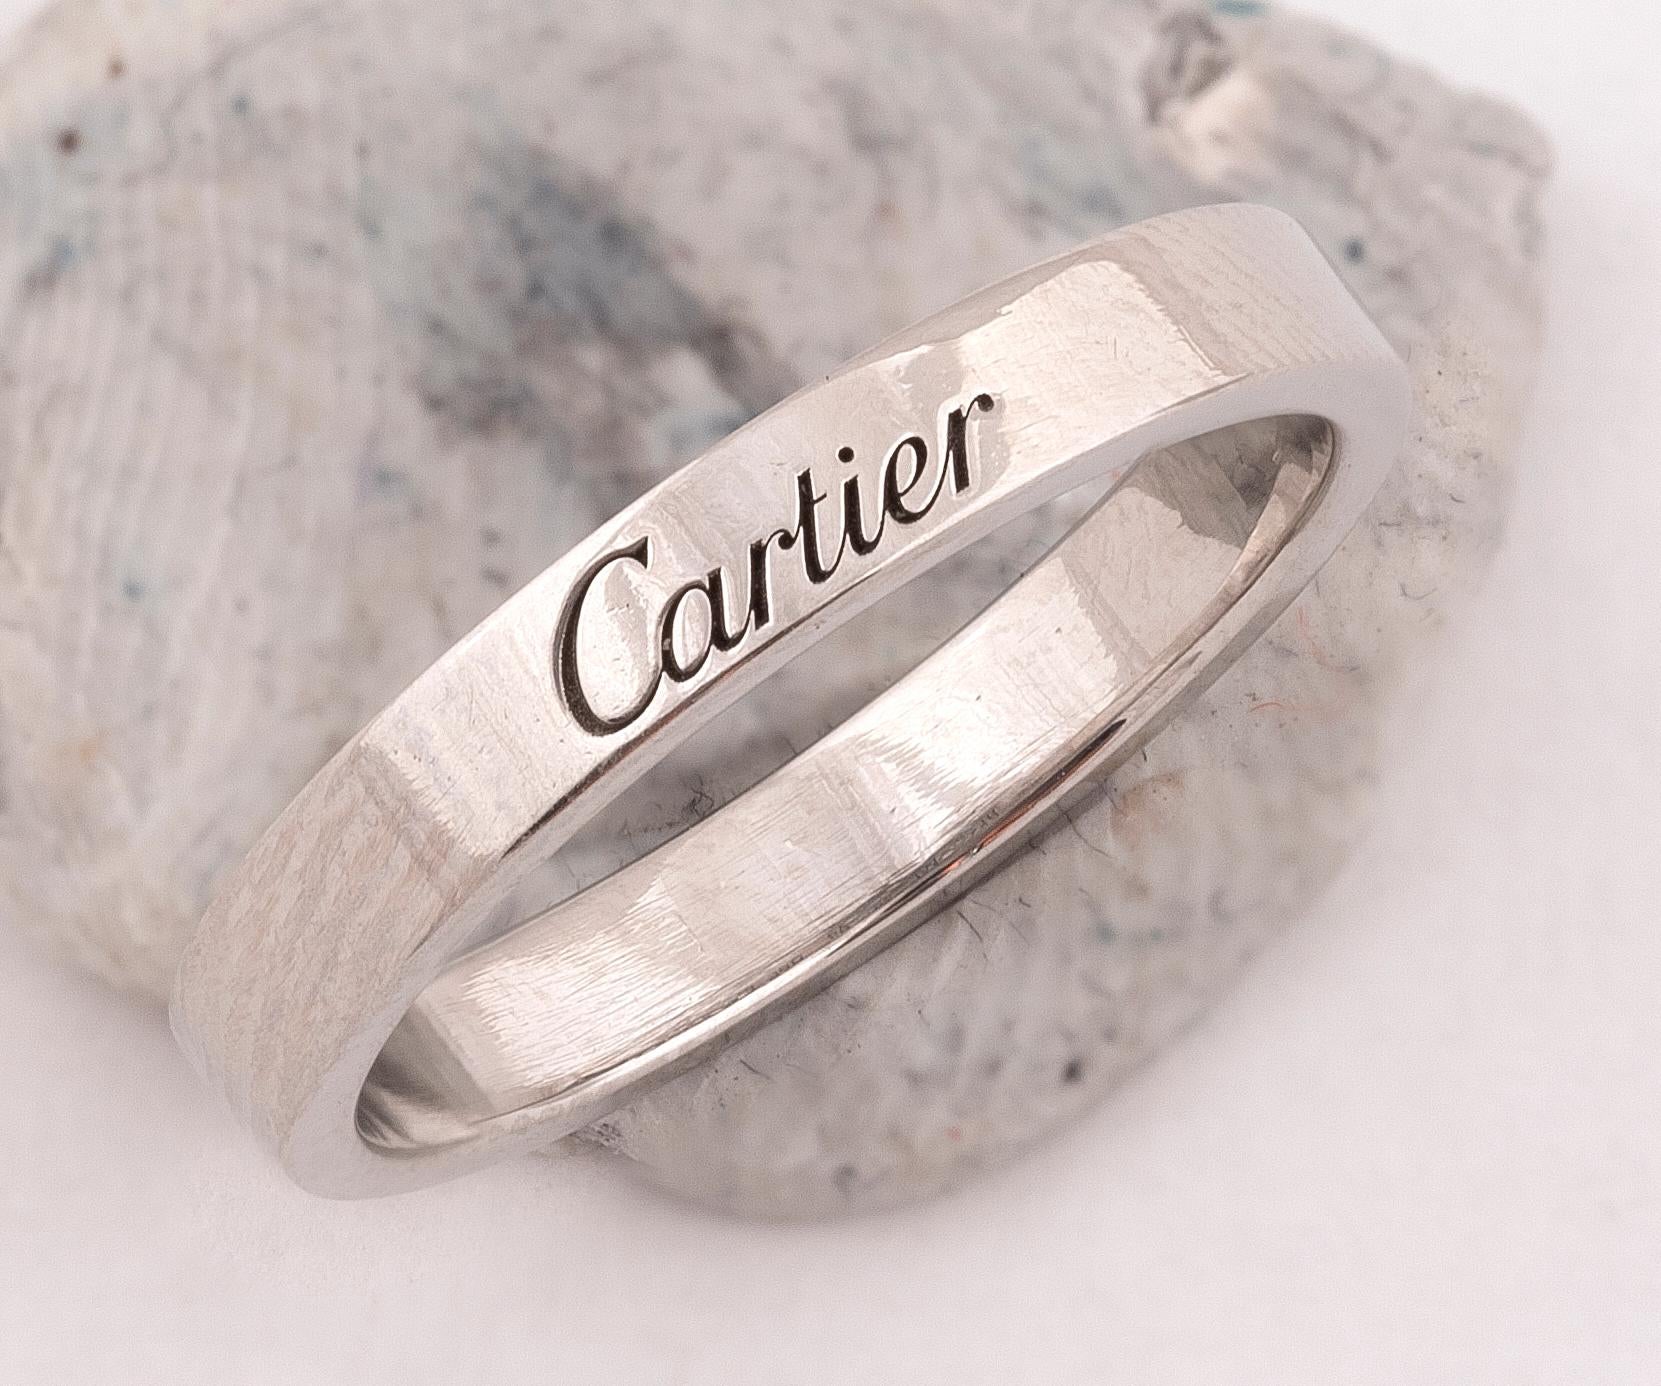 Platinum Band Ring by Cartier In Excellent Condition For Sale In Firenze, IT